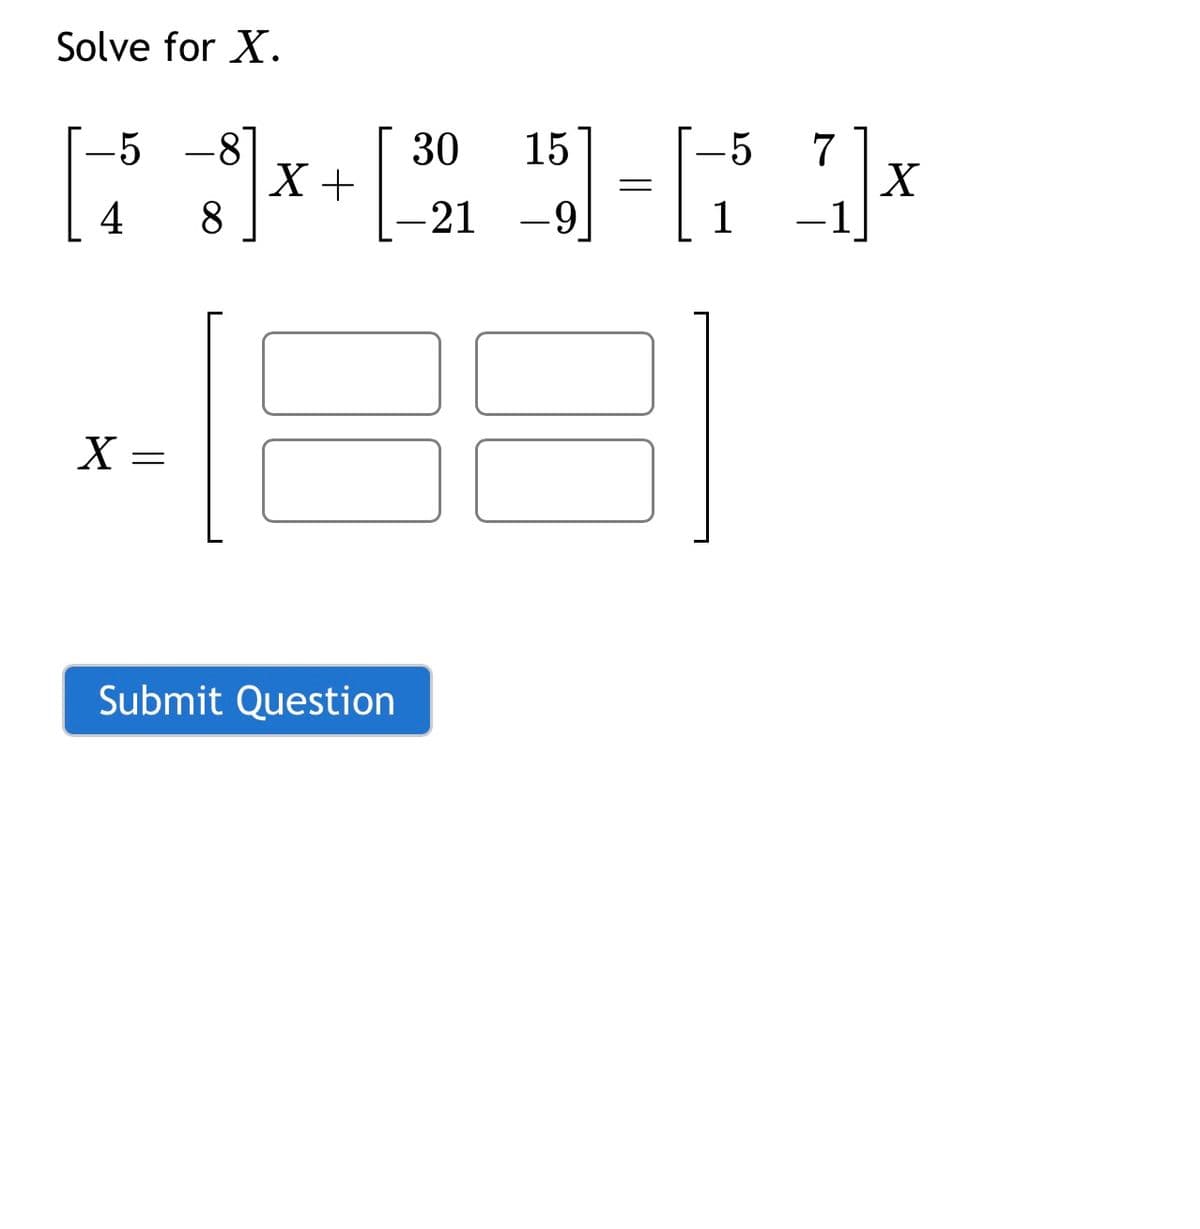 Solve for X.
-5
4
X =
8
8
+
X +
Submit Question
30
- 21
15
-9
-
=
5
1
7
A
X